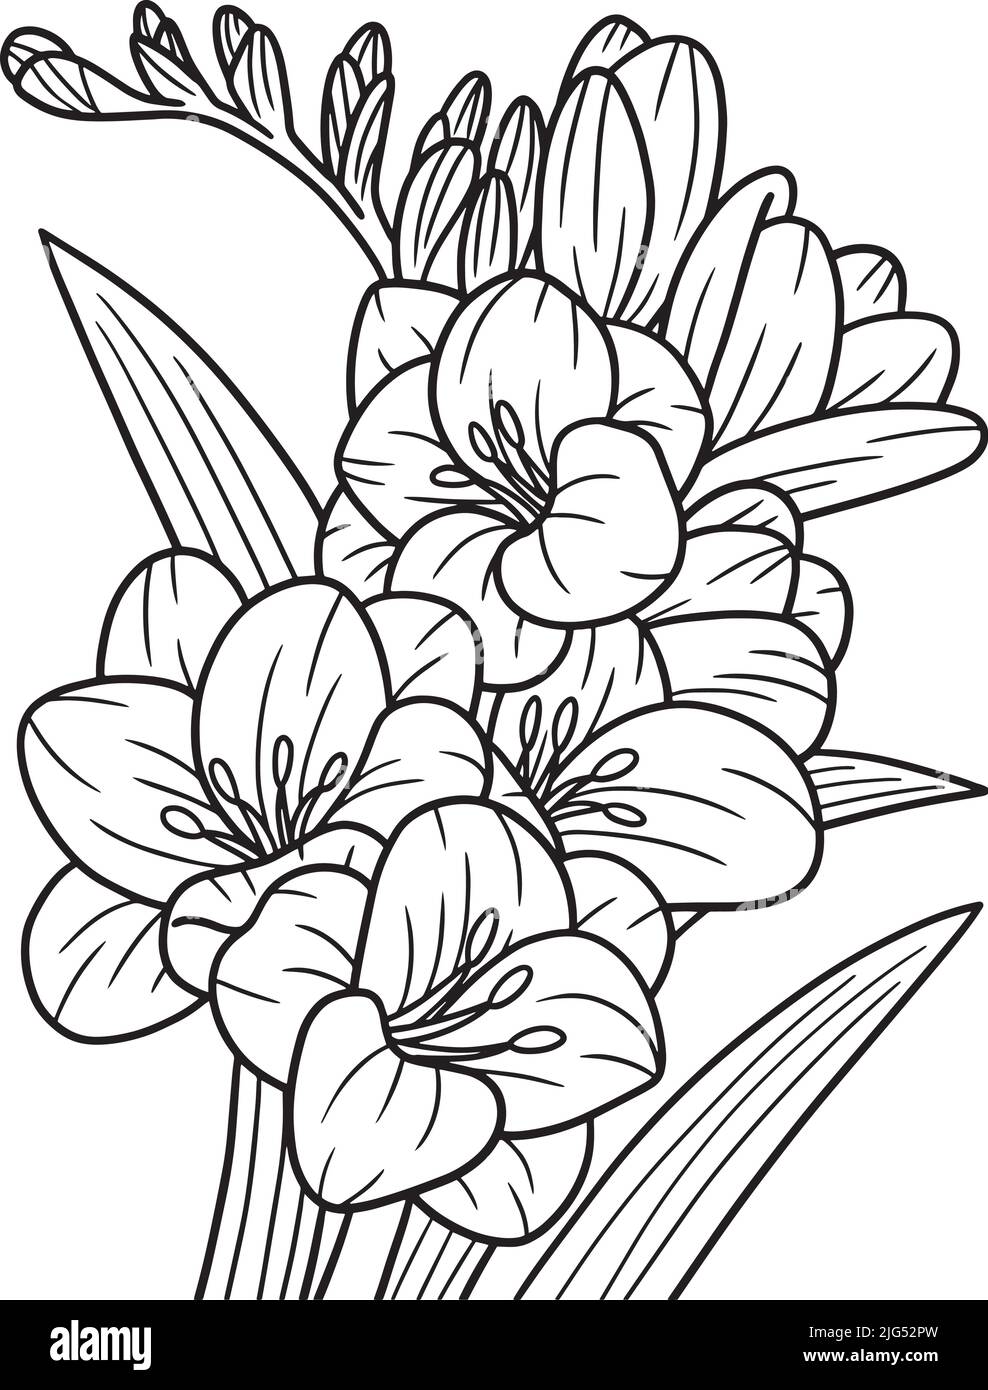 Freesia Flower Coloring Page for Adults Stock Vector